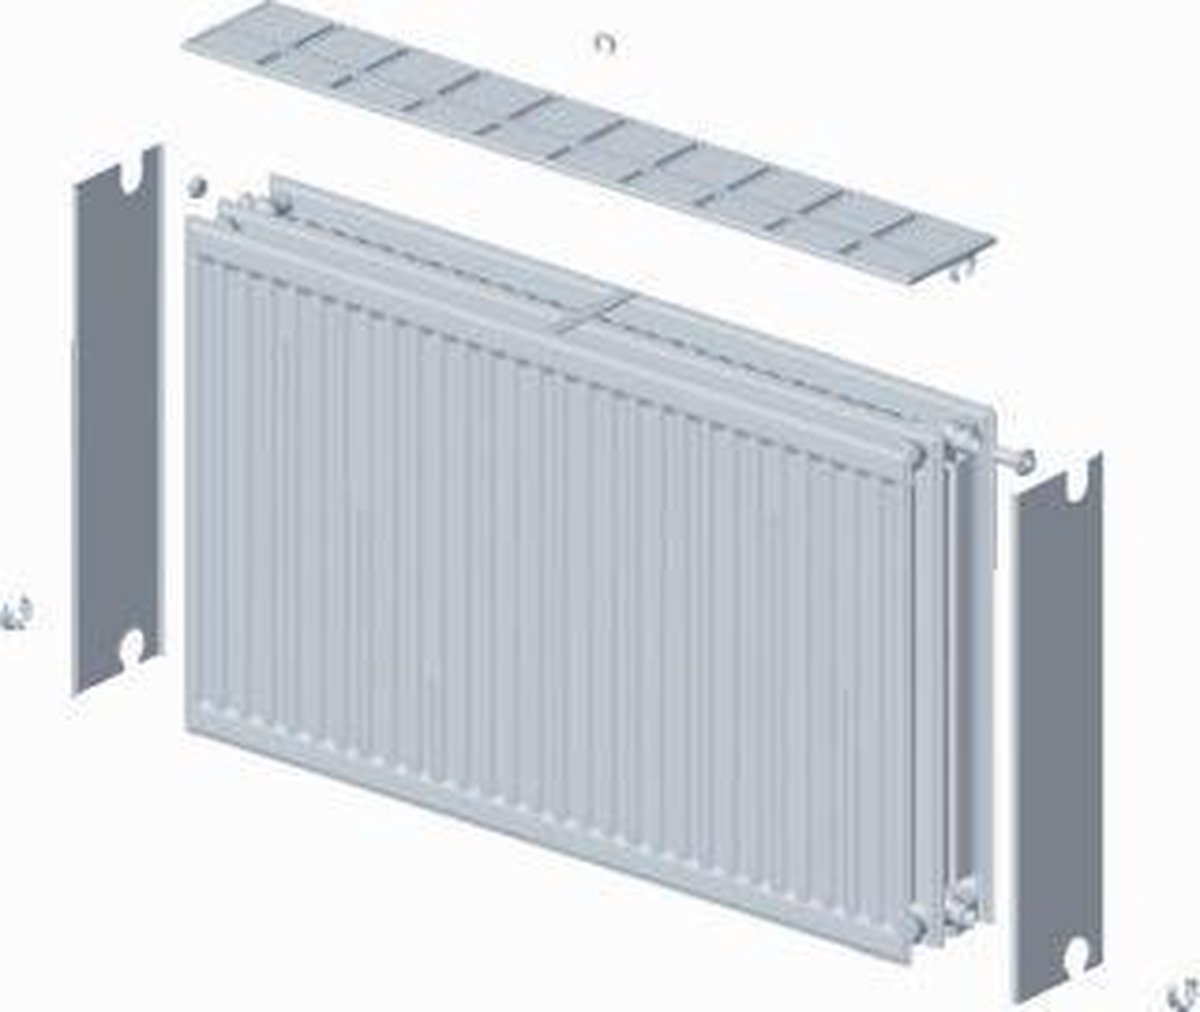 Stelrad paneelradiator Novello, staal, wit, (hxlxd) 300x1800x158mm, 33